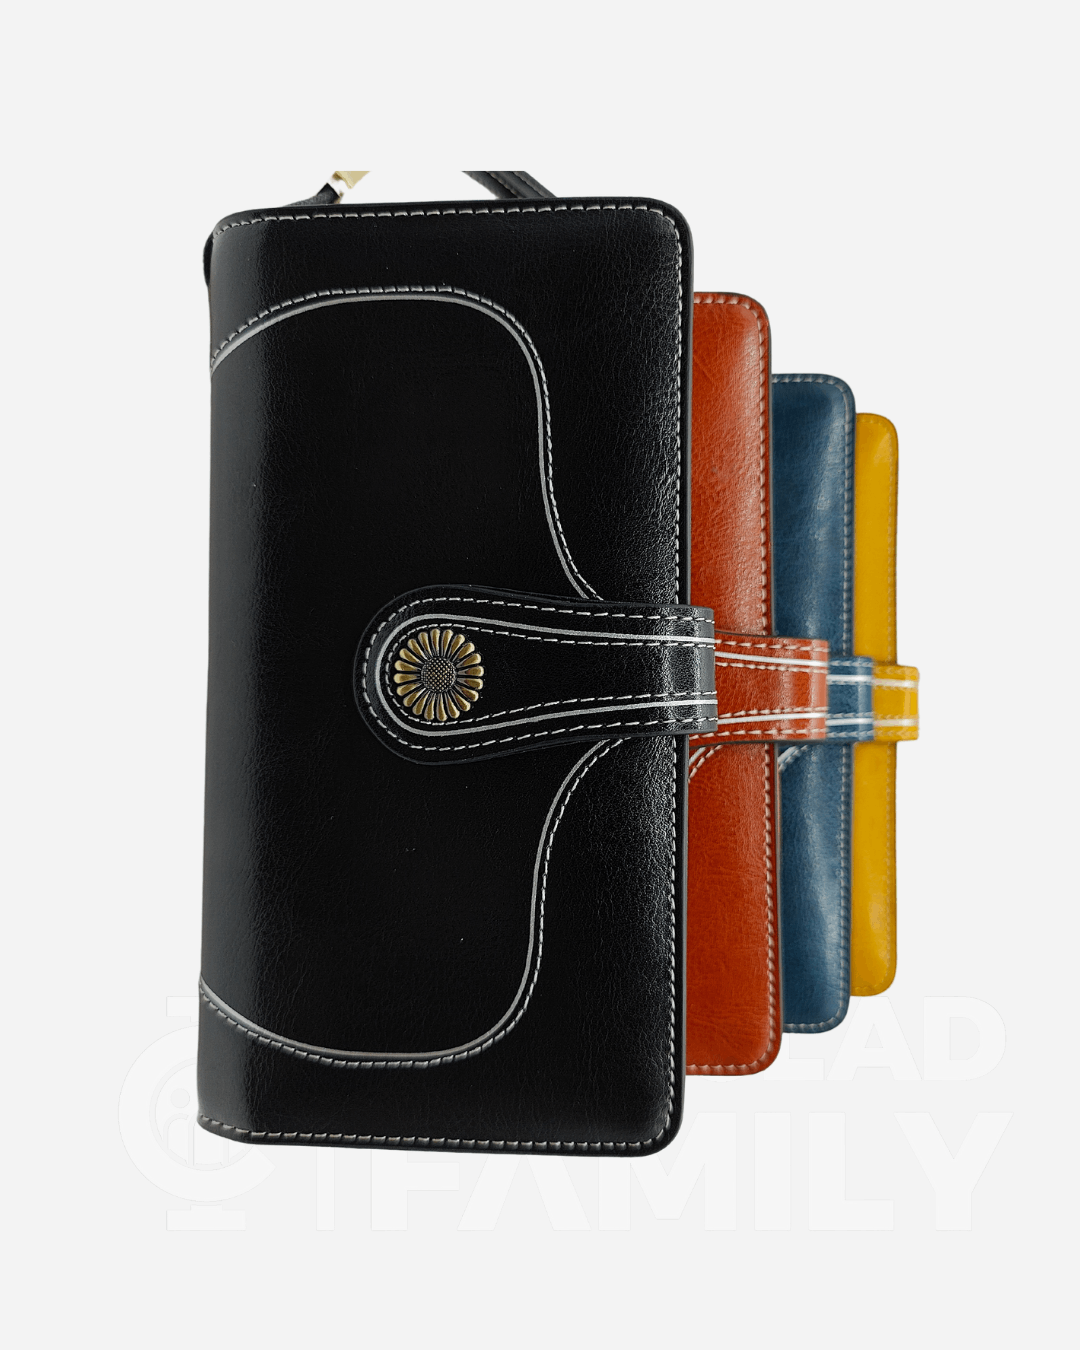 Assortment of four different colored RFID blocking large capacity leather wallets with zippers